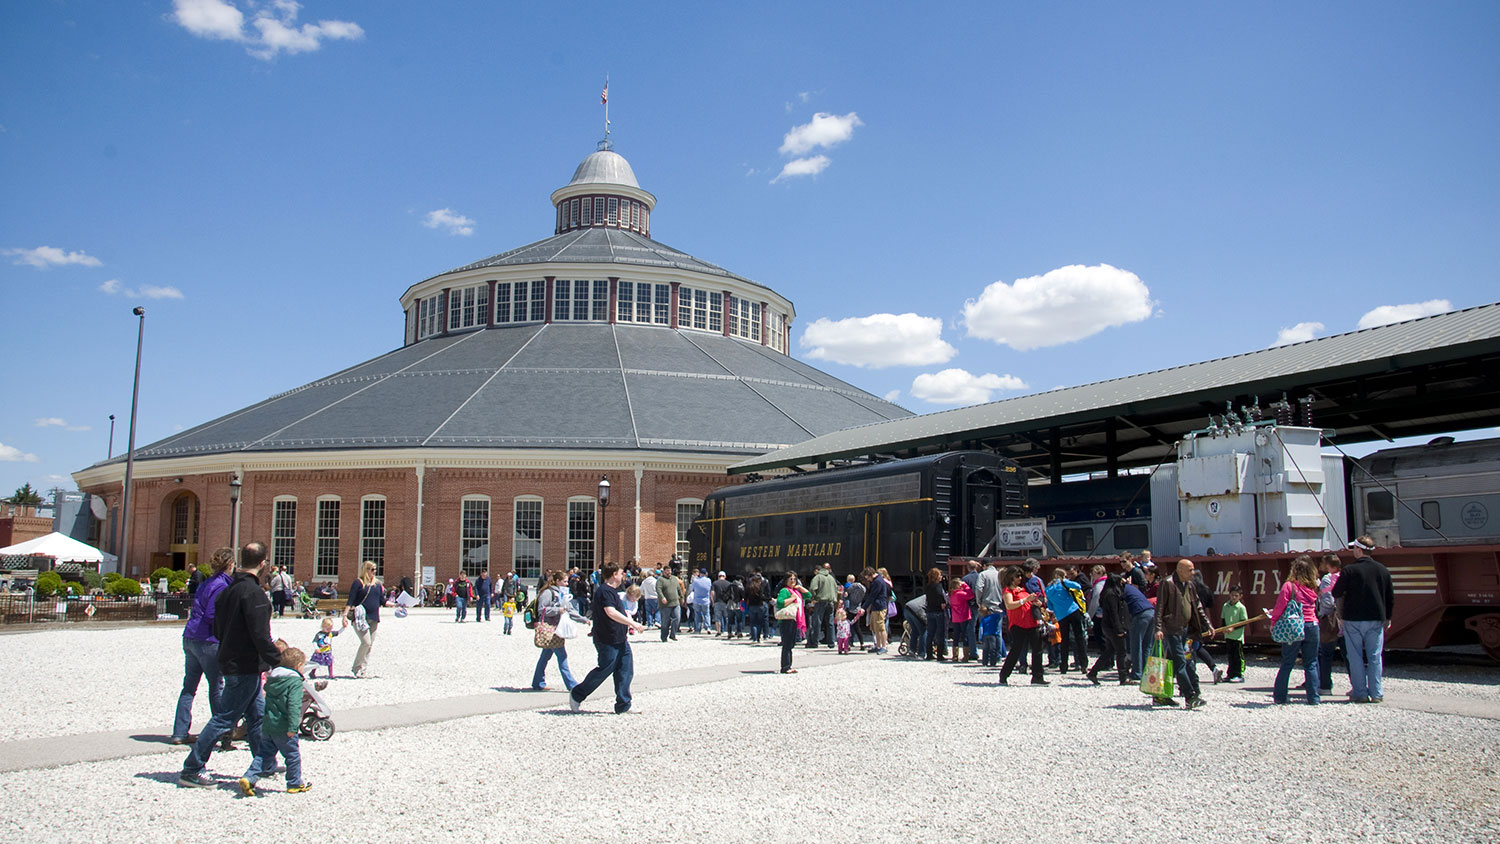 Exterior of the B&O Railroad Museum in Baltimore, MD.